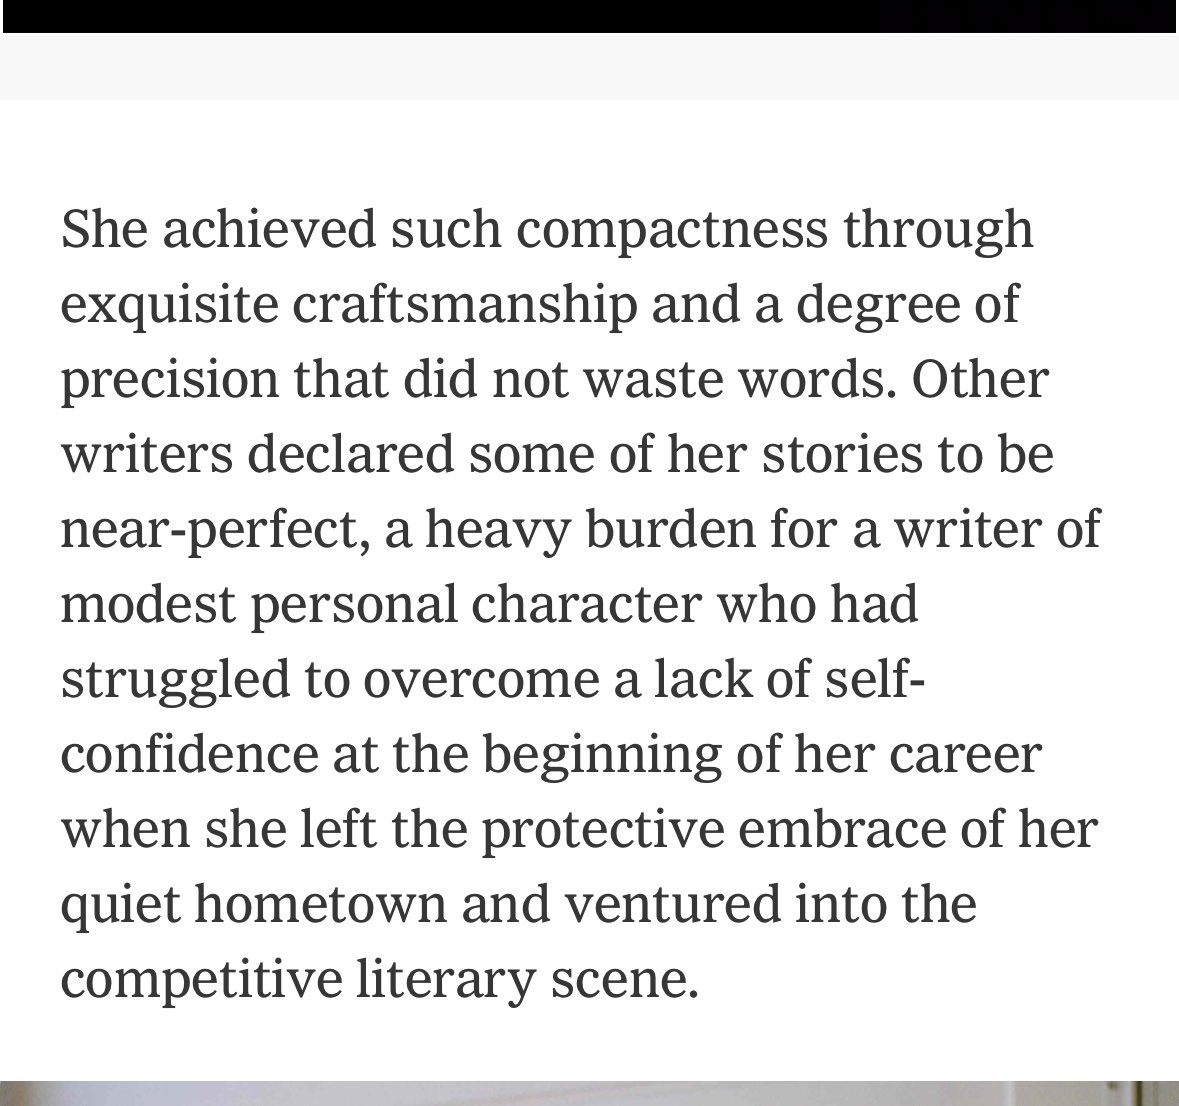 The NYT obit of Alice Munro is a useful reminder that insecurity claws at the heart of most writers.